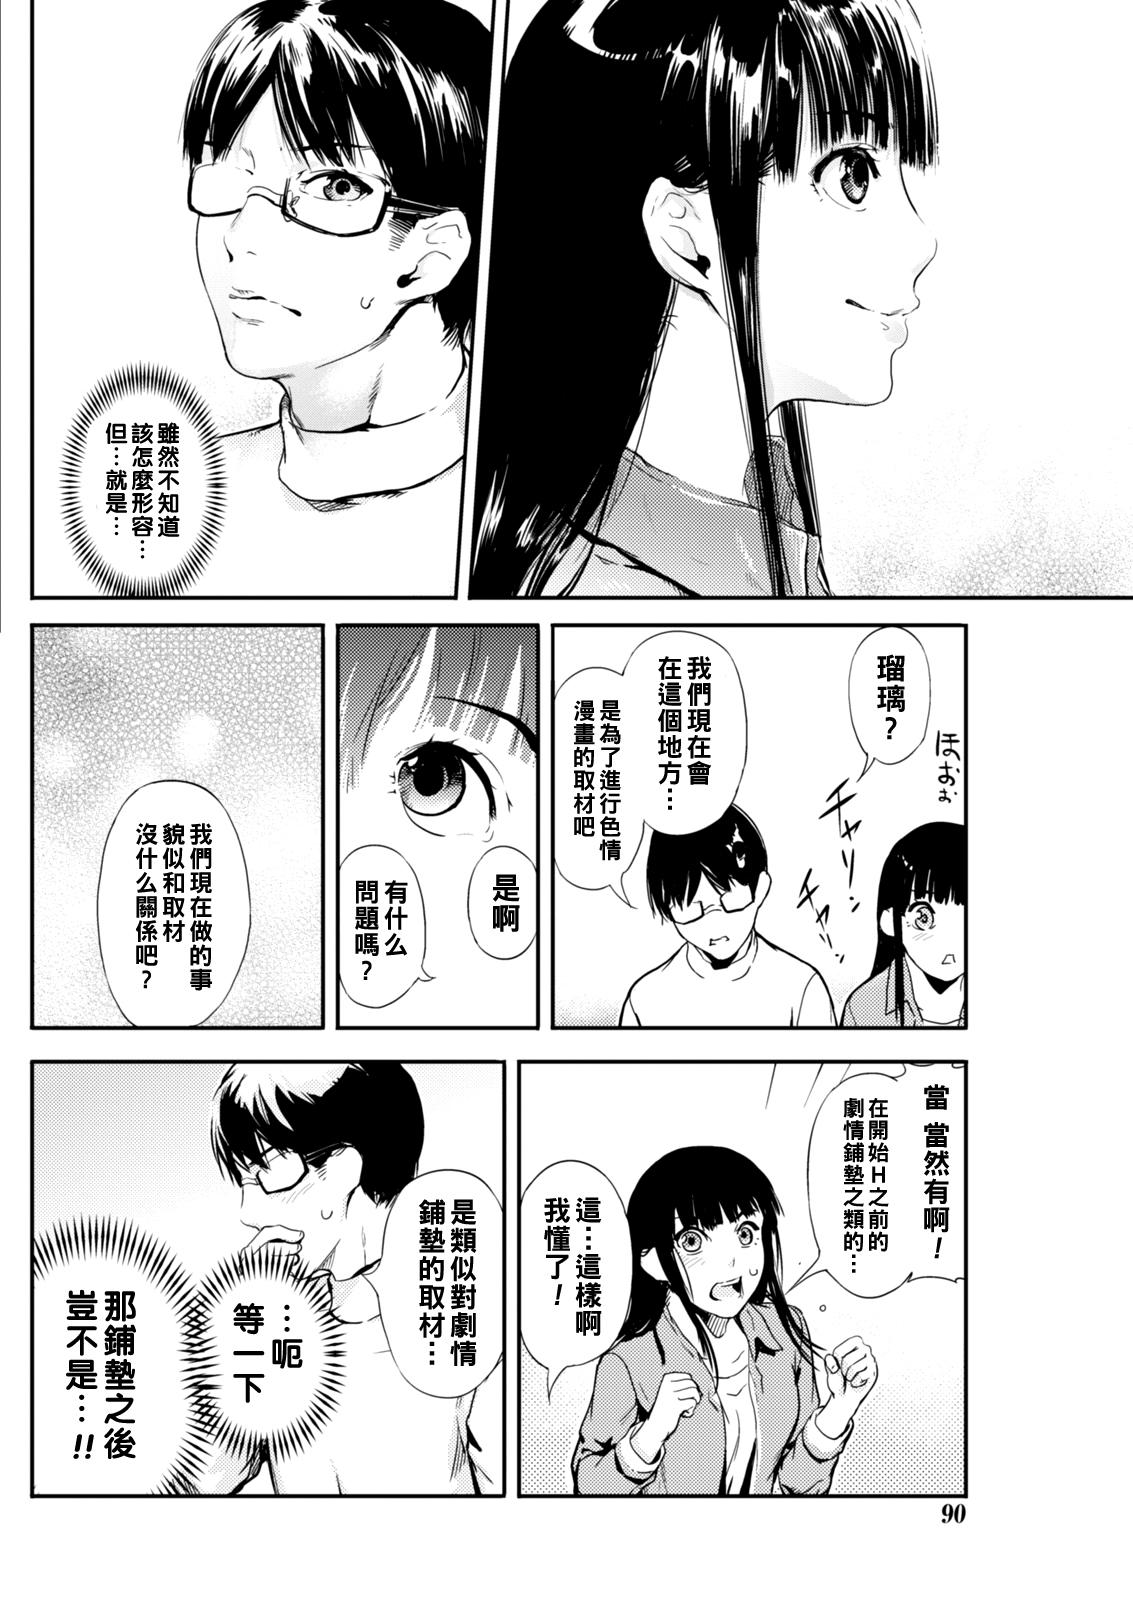 Anal Play 漫画ガール（Chinese） Tanned - Page 6